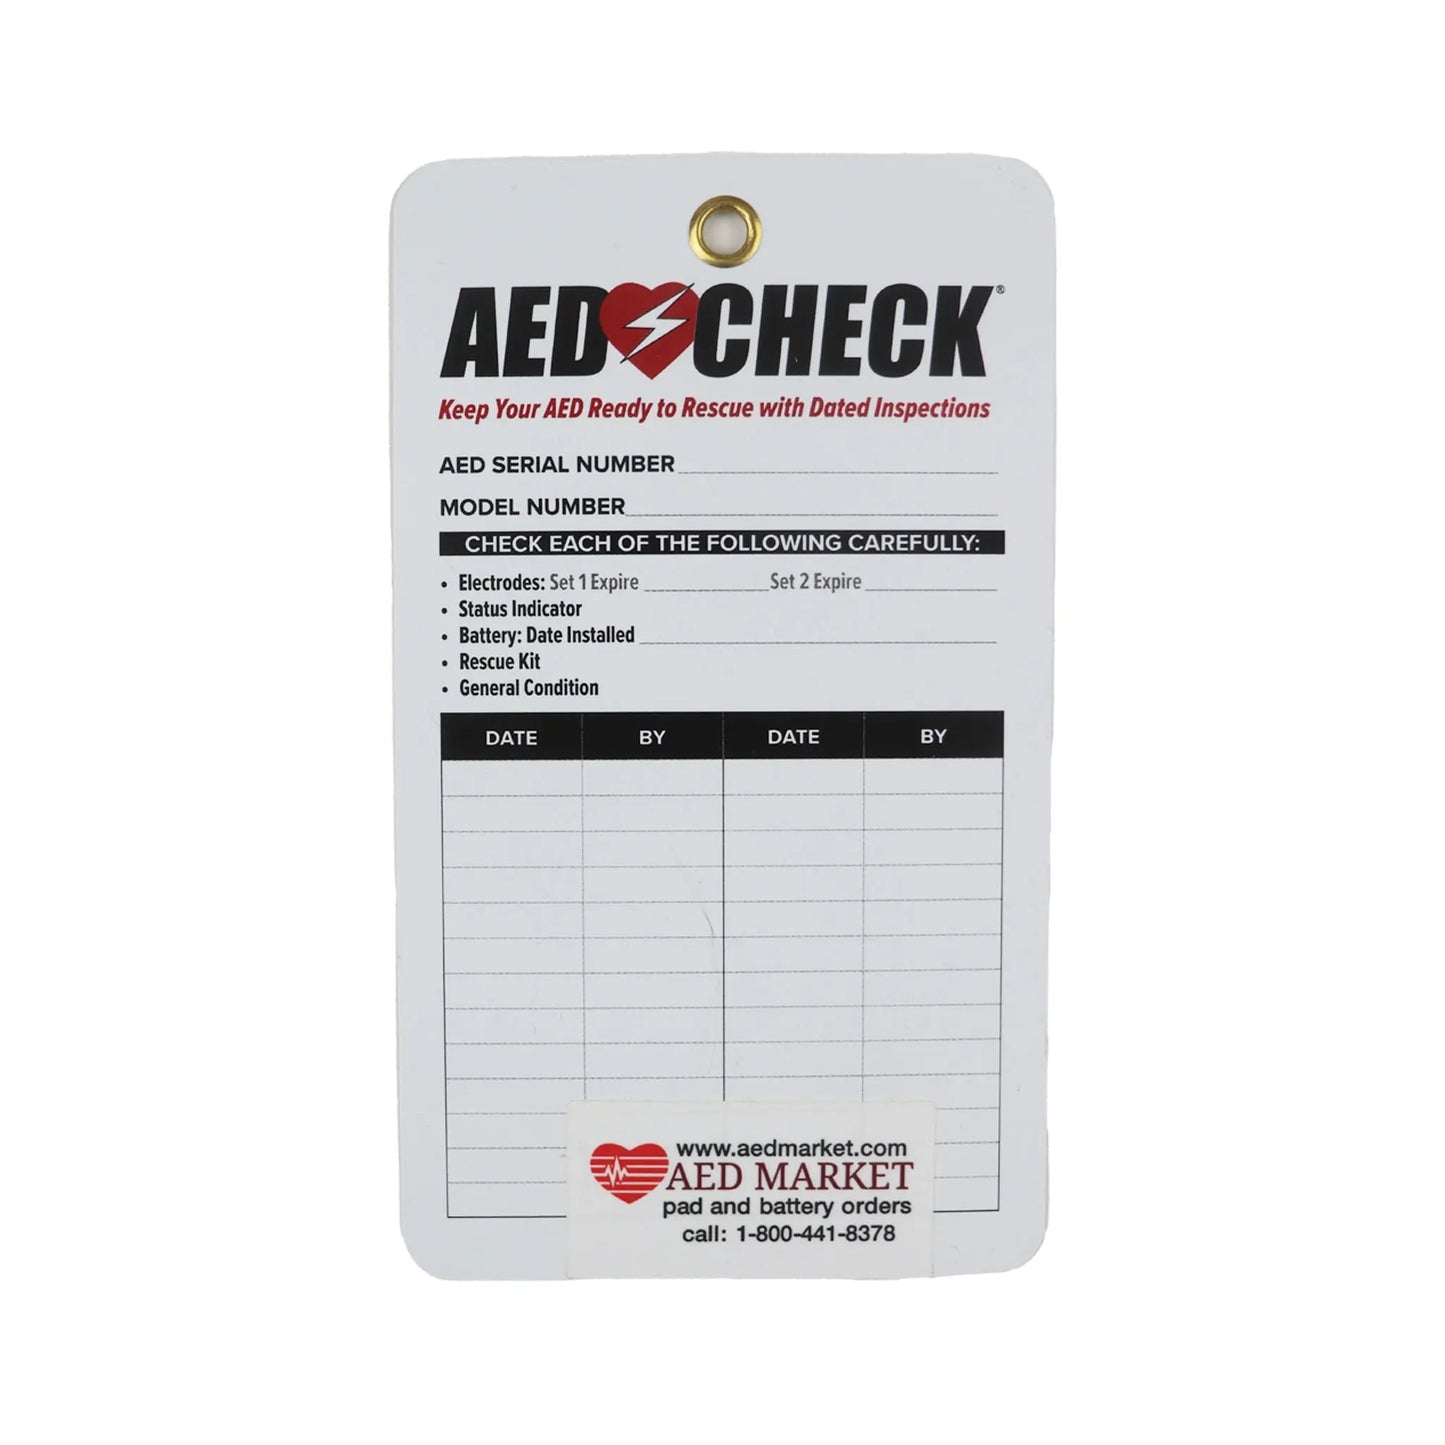 Defibtech Lifeline View - New AED Value Package - First Aid Market